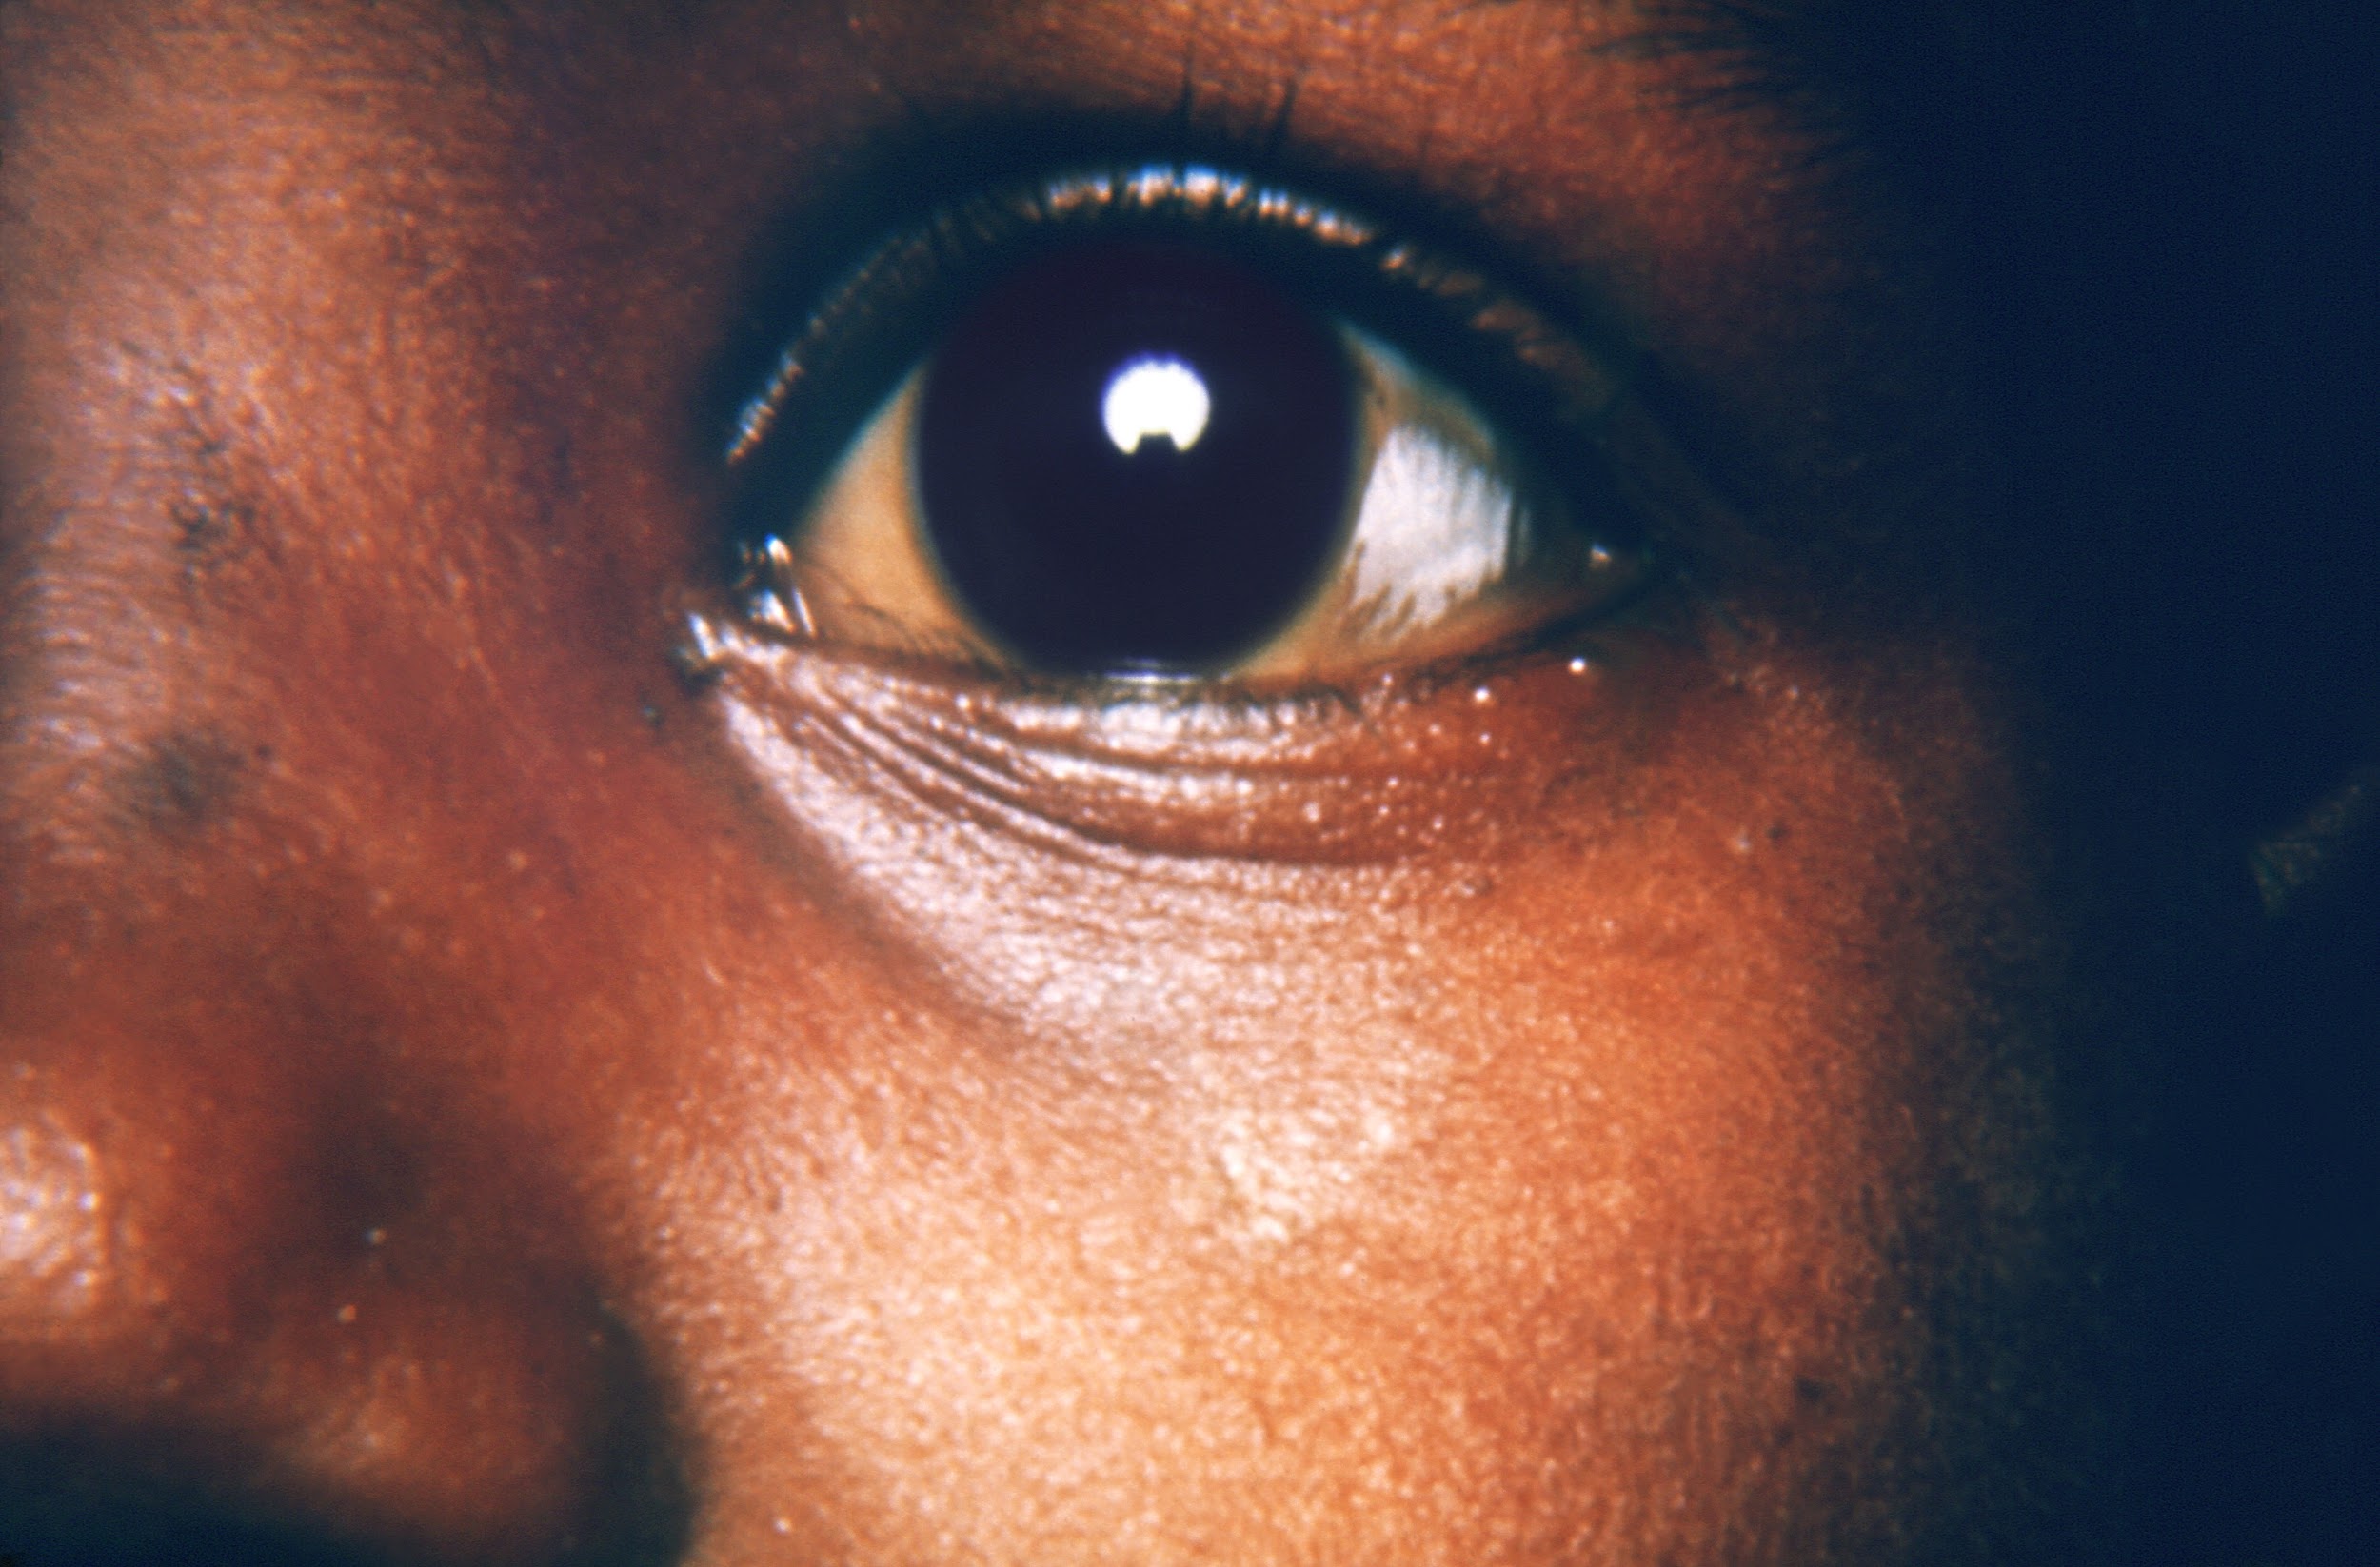 A photo shows the eye of a child with xerophthalmia. The surface of the eye is subtly but visible clouded.